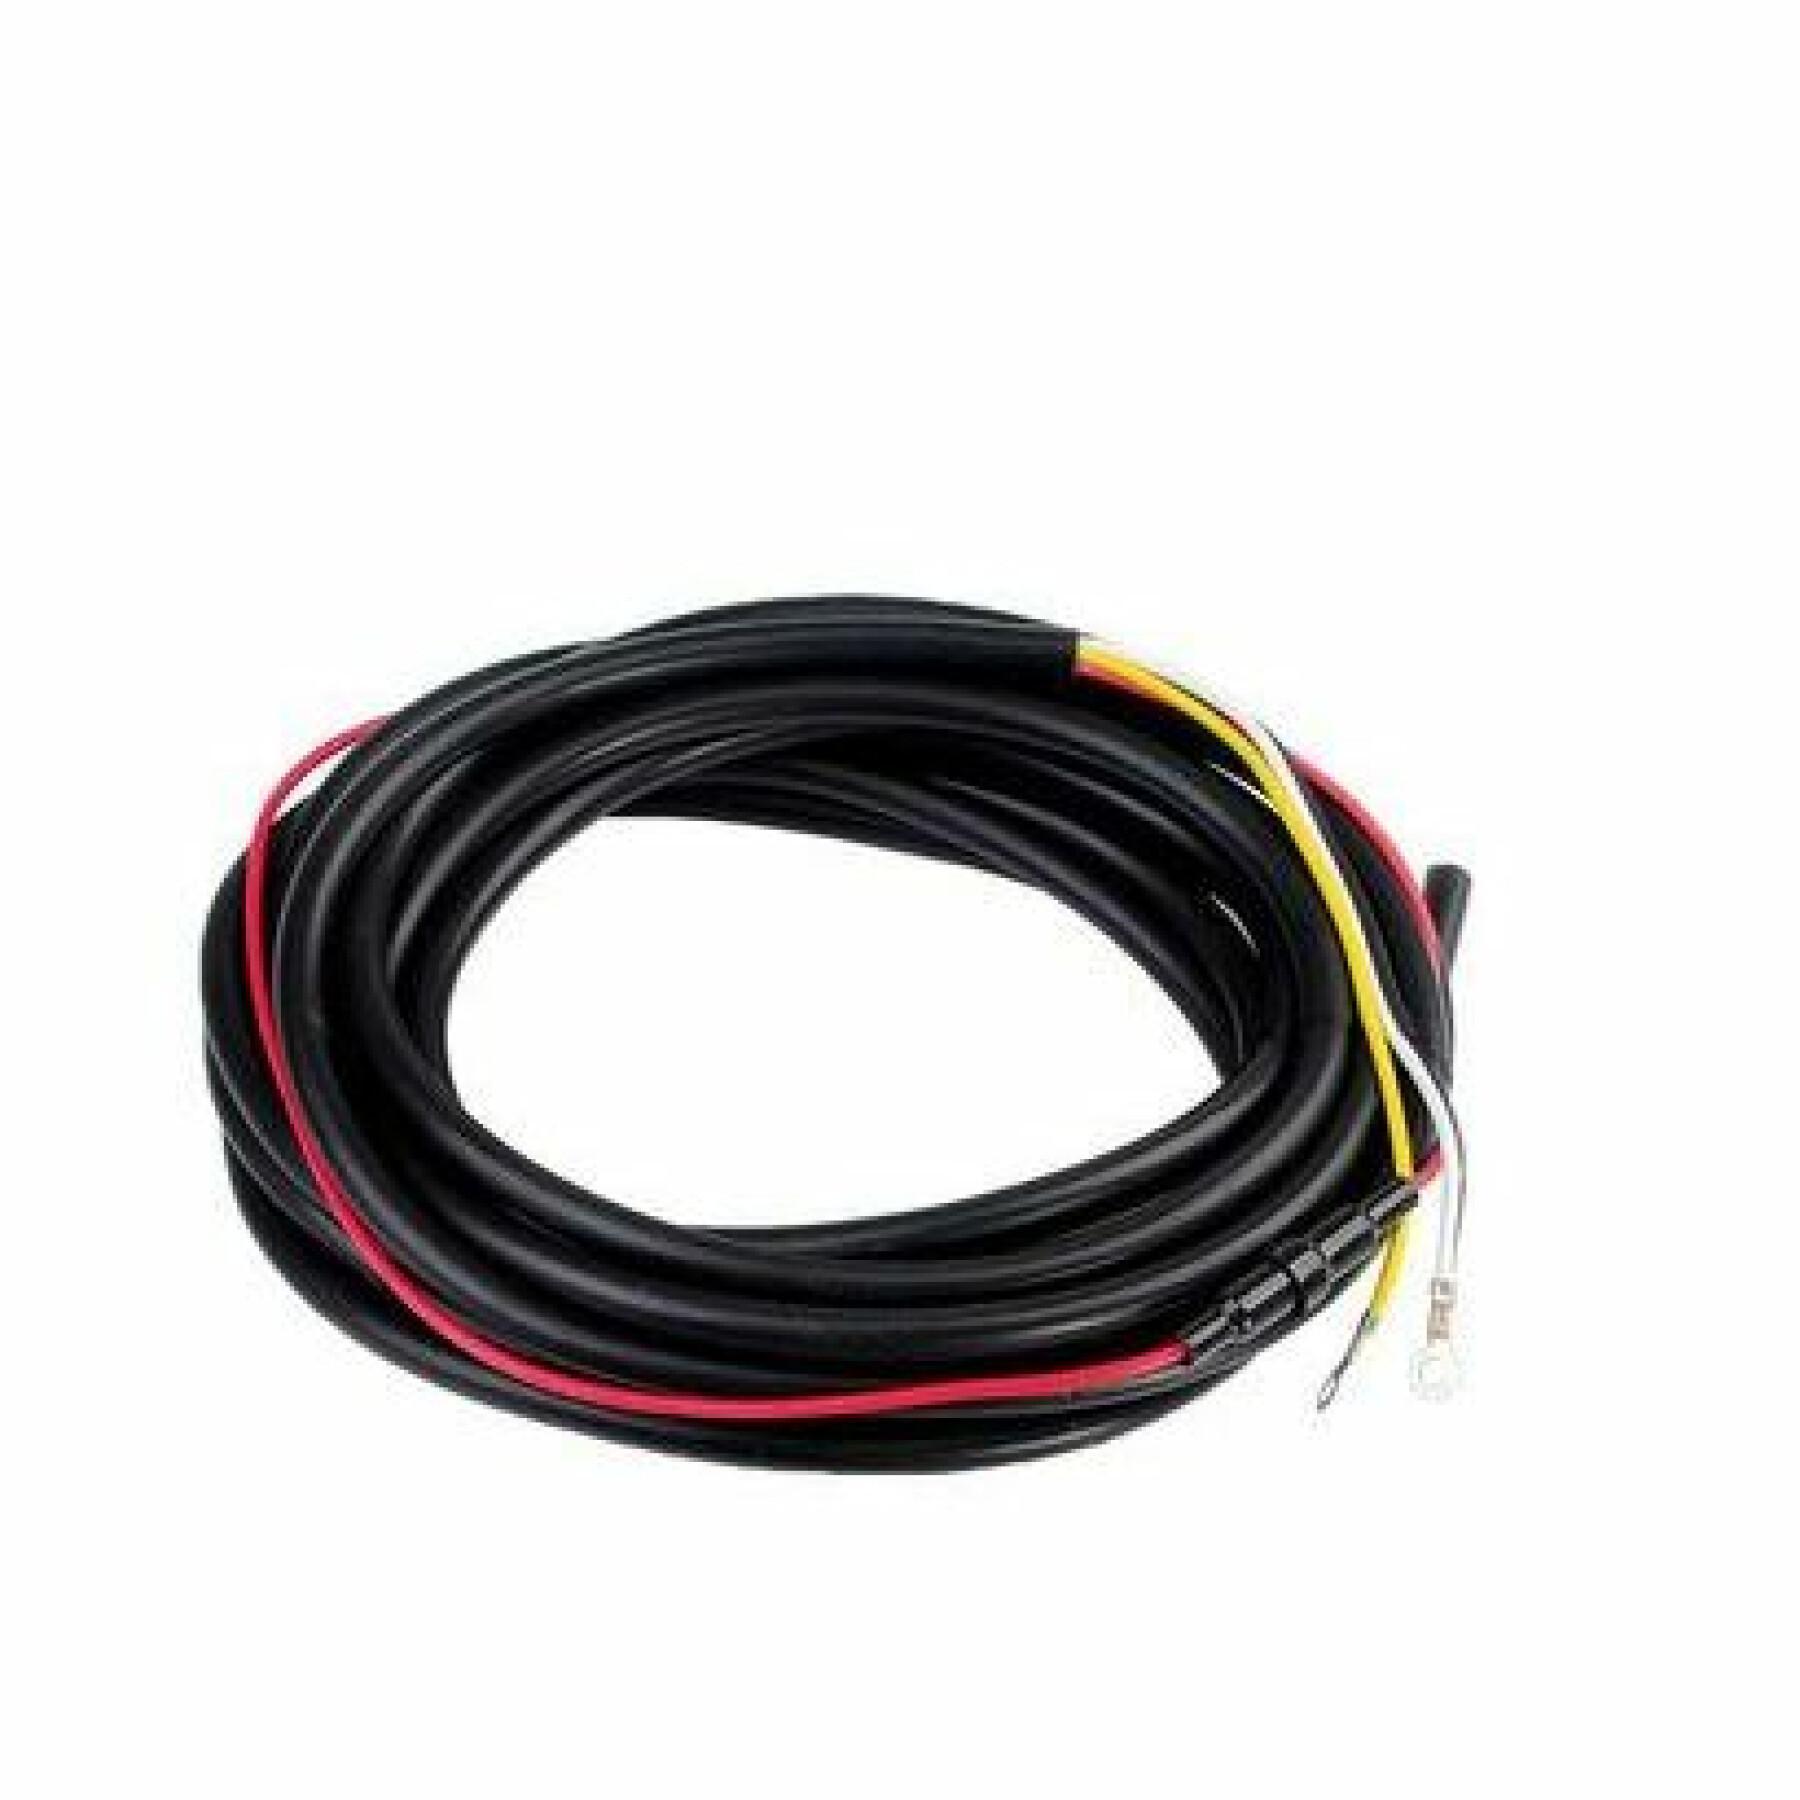 Battery manager - shunt 100 amp 5 m connection cable Nasa BM-1